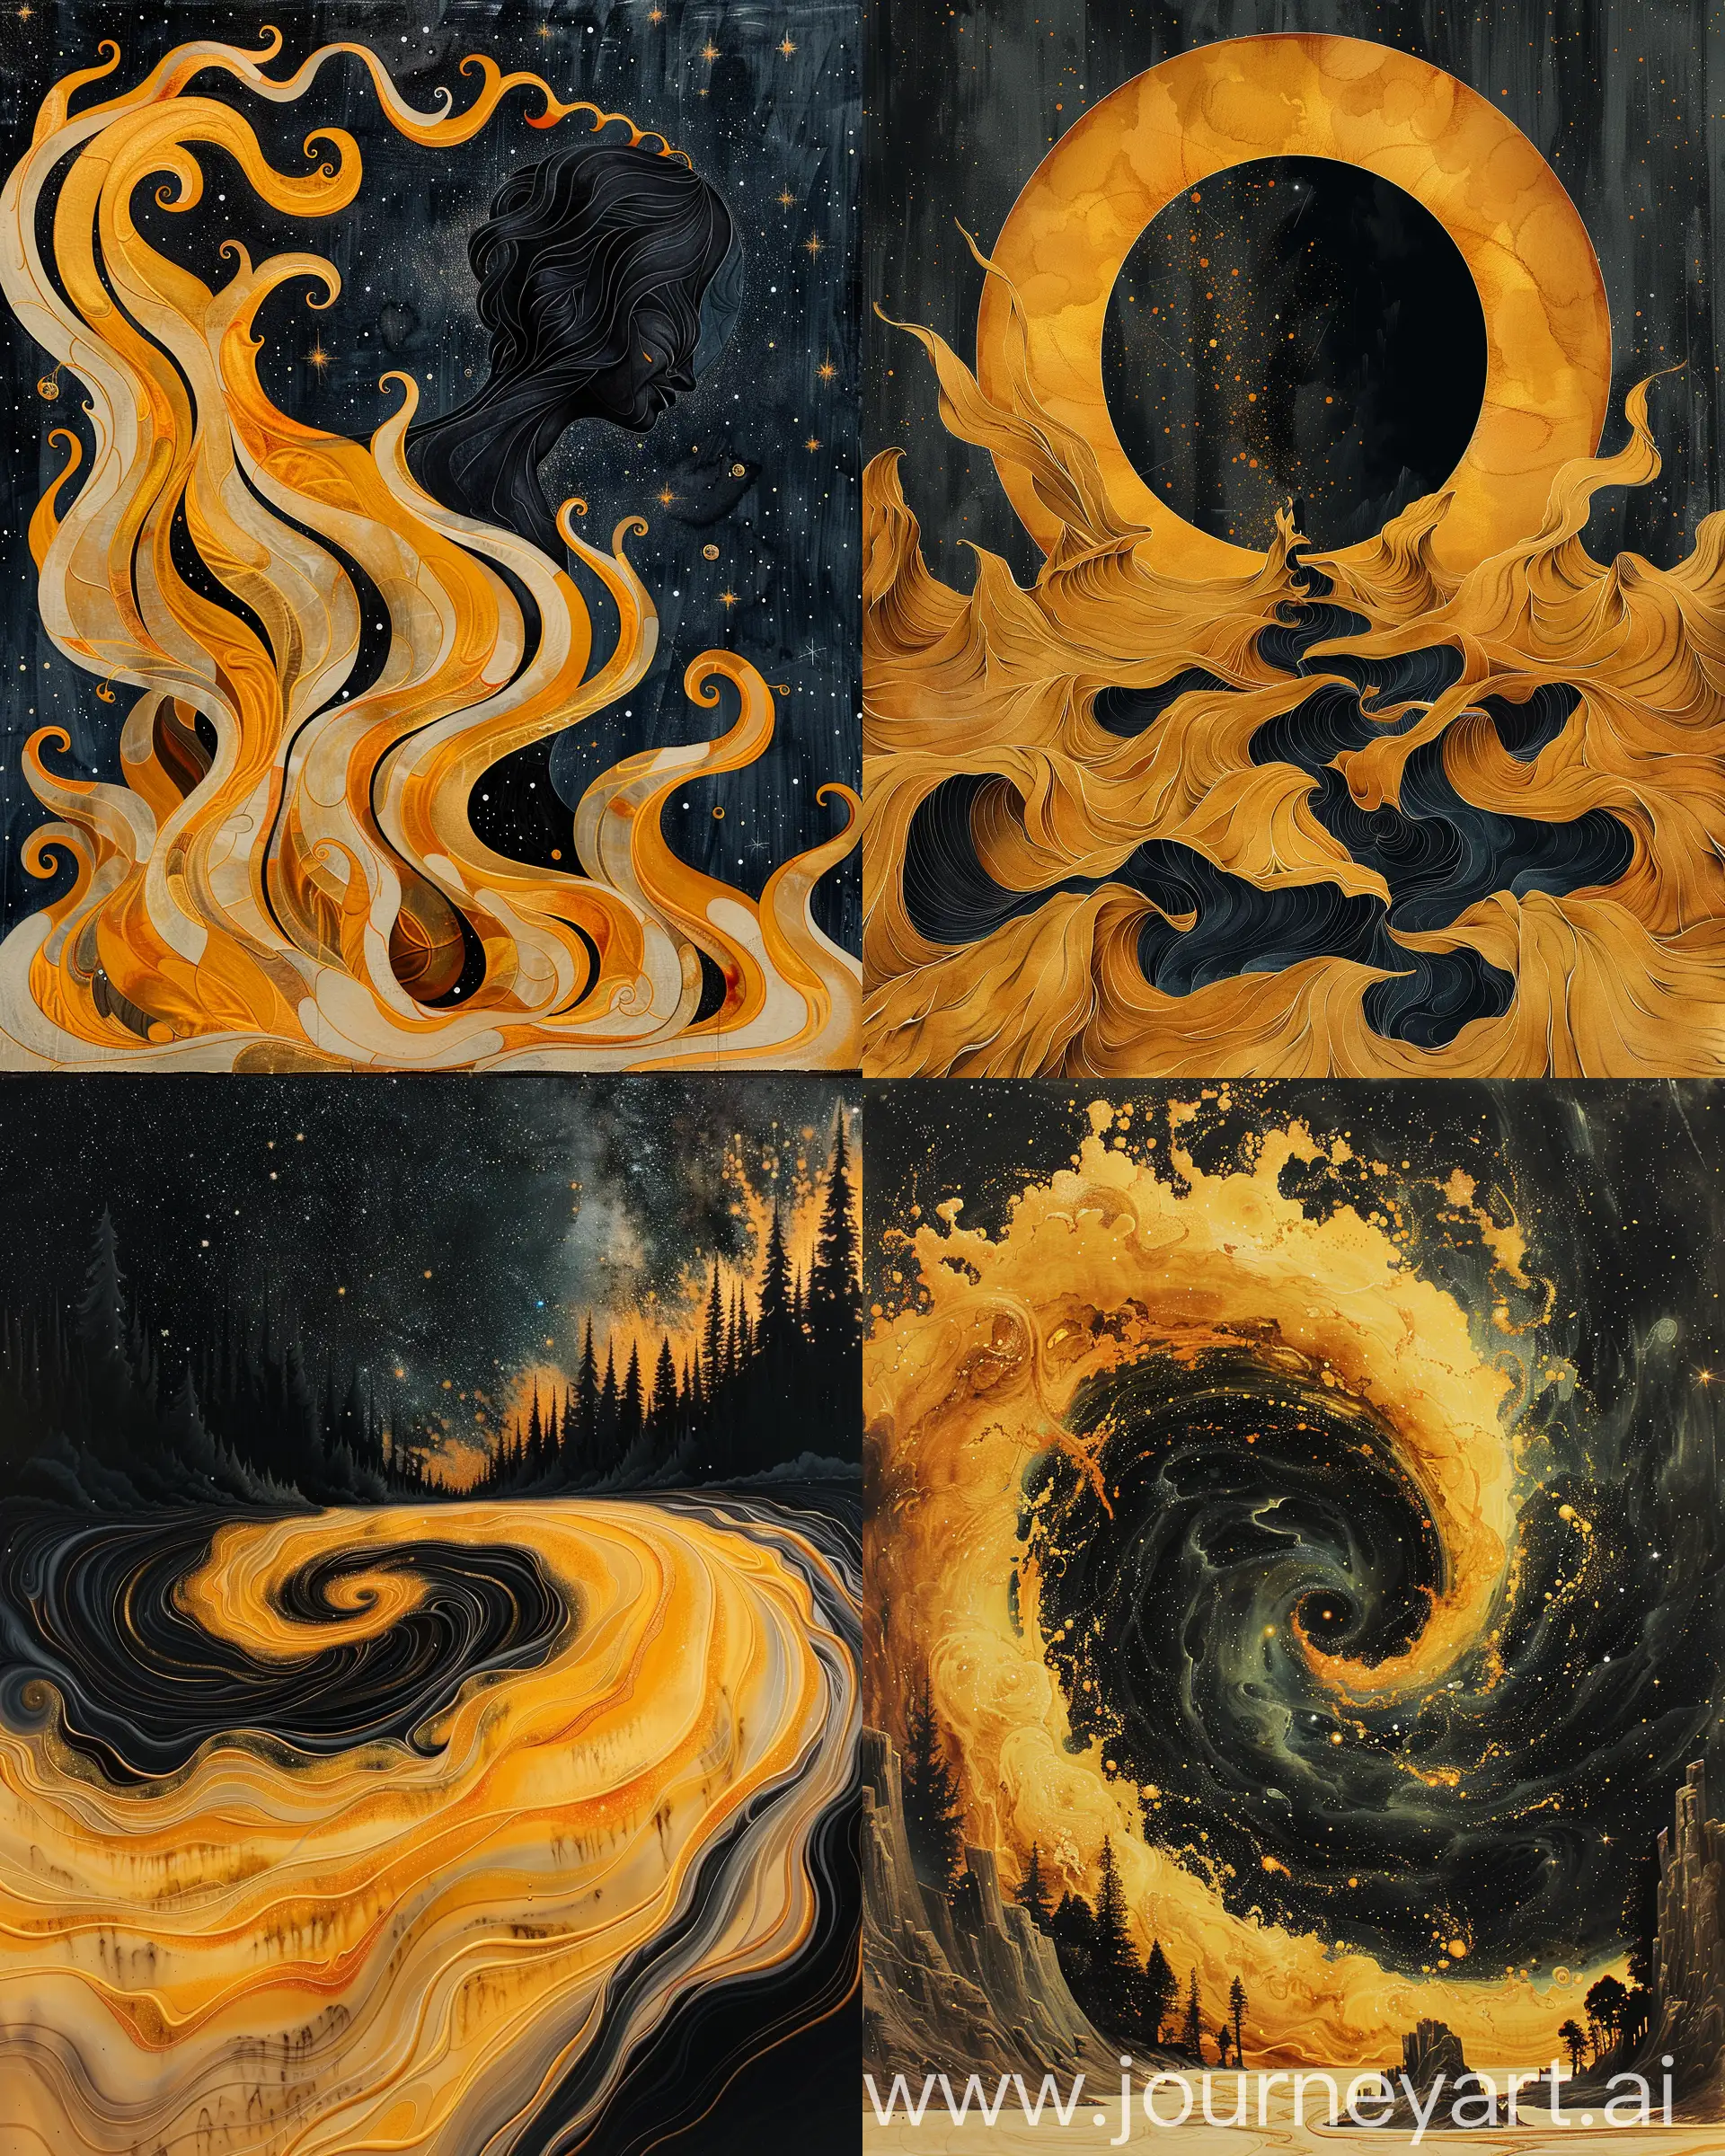 Art-Nouveau-Style-Black-Hole-with-Swirling-Accretion-Disk-and-Starfield-Backdrop